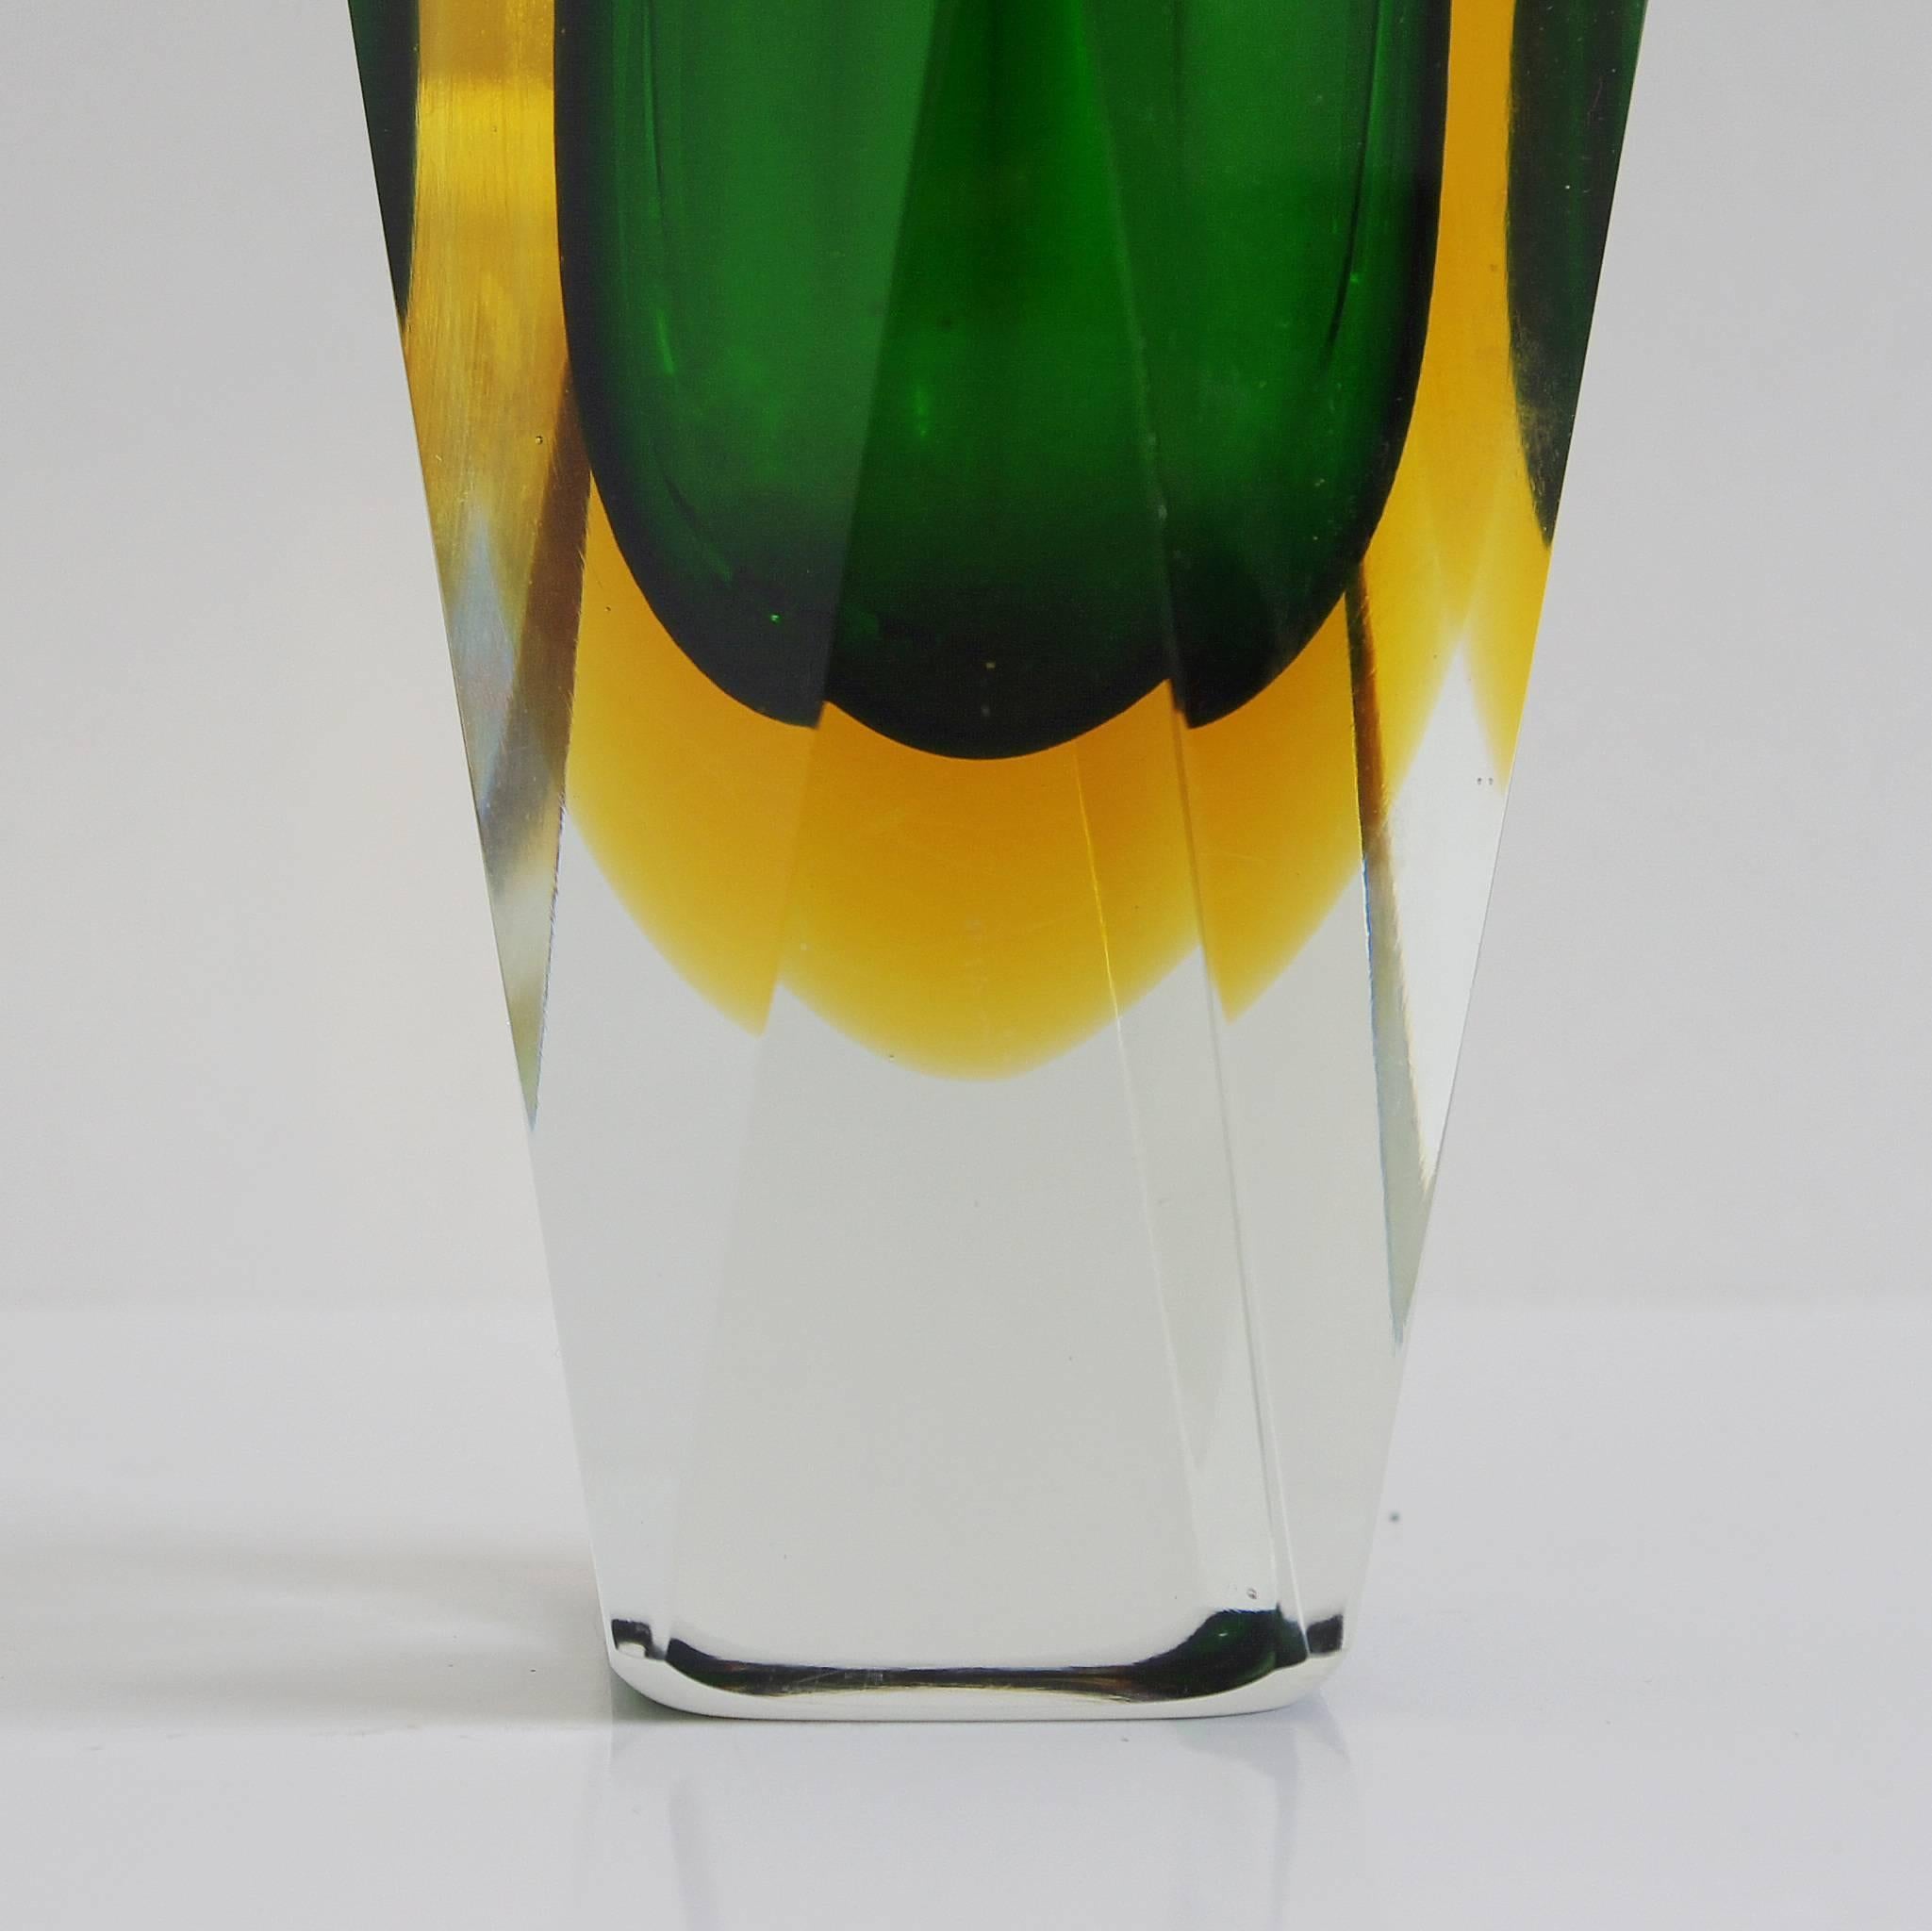 20th Century Italian Murano Glass Green and Yellow Sommerso Faceted Vase by Mandruzzato